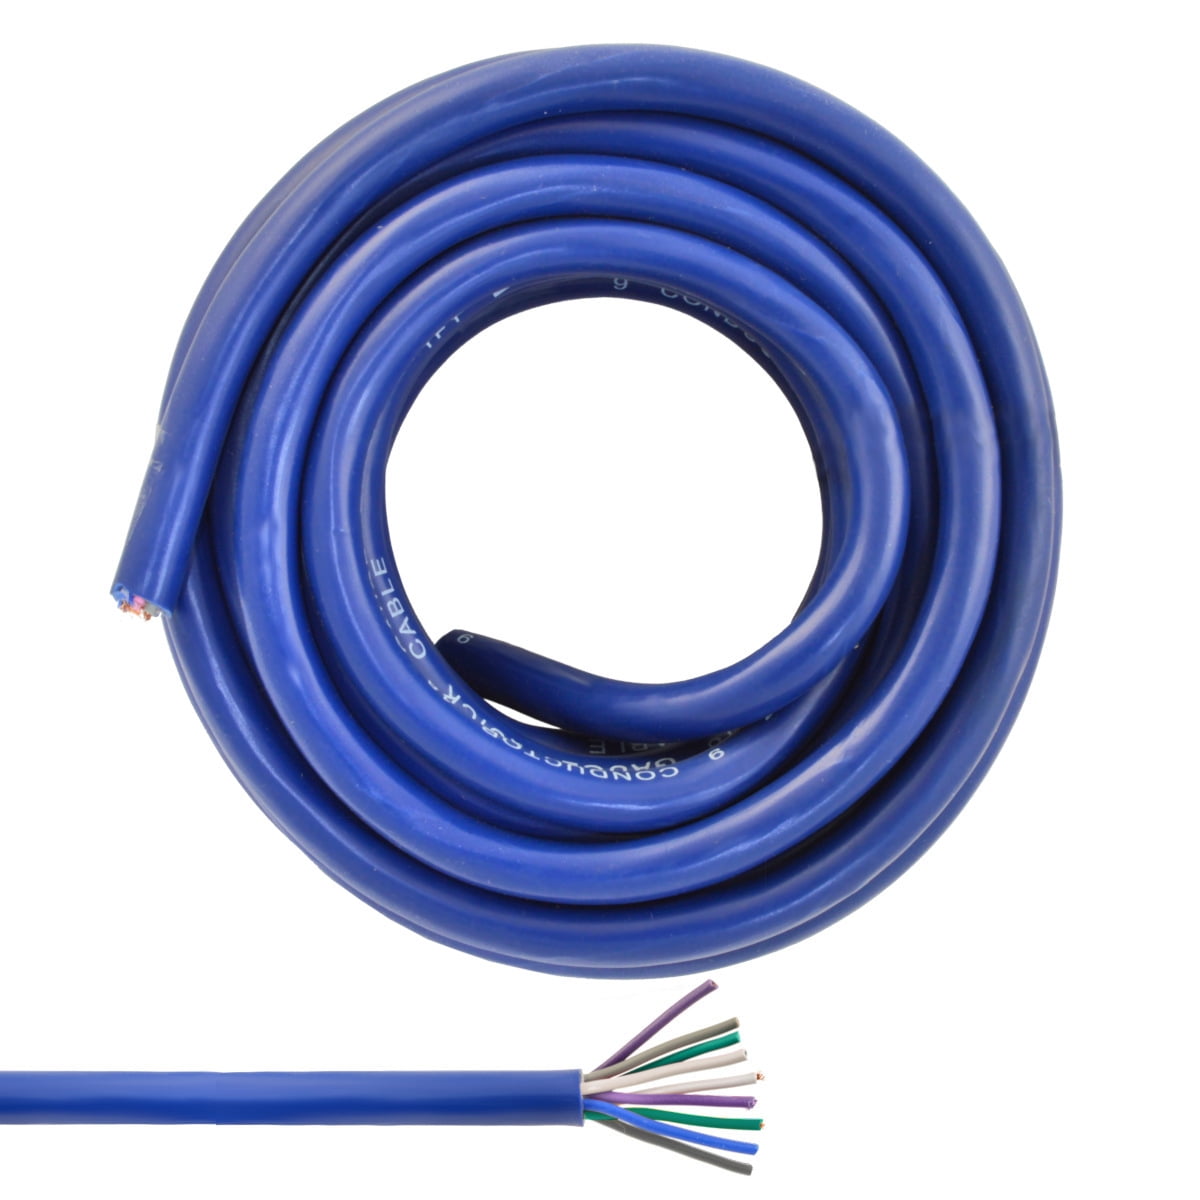 Stinger SGW992 9 Conductor Speed Wire Blue for sale online 